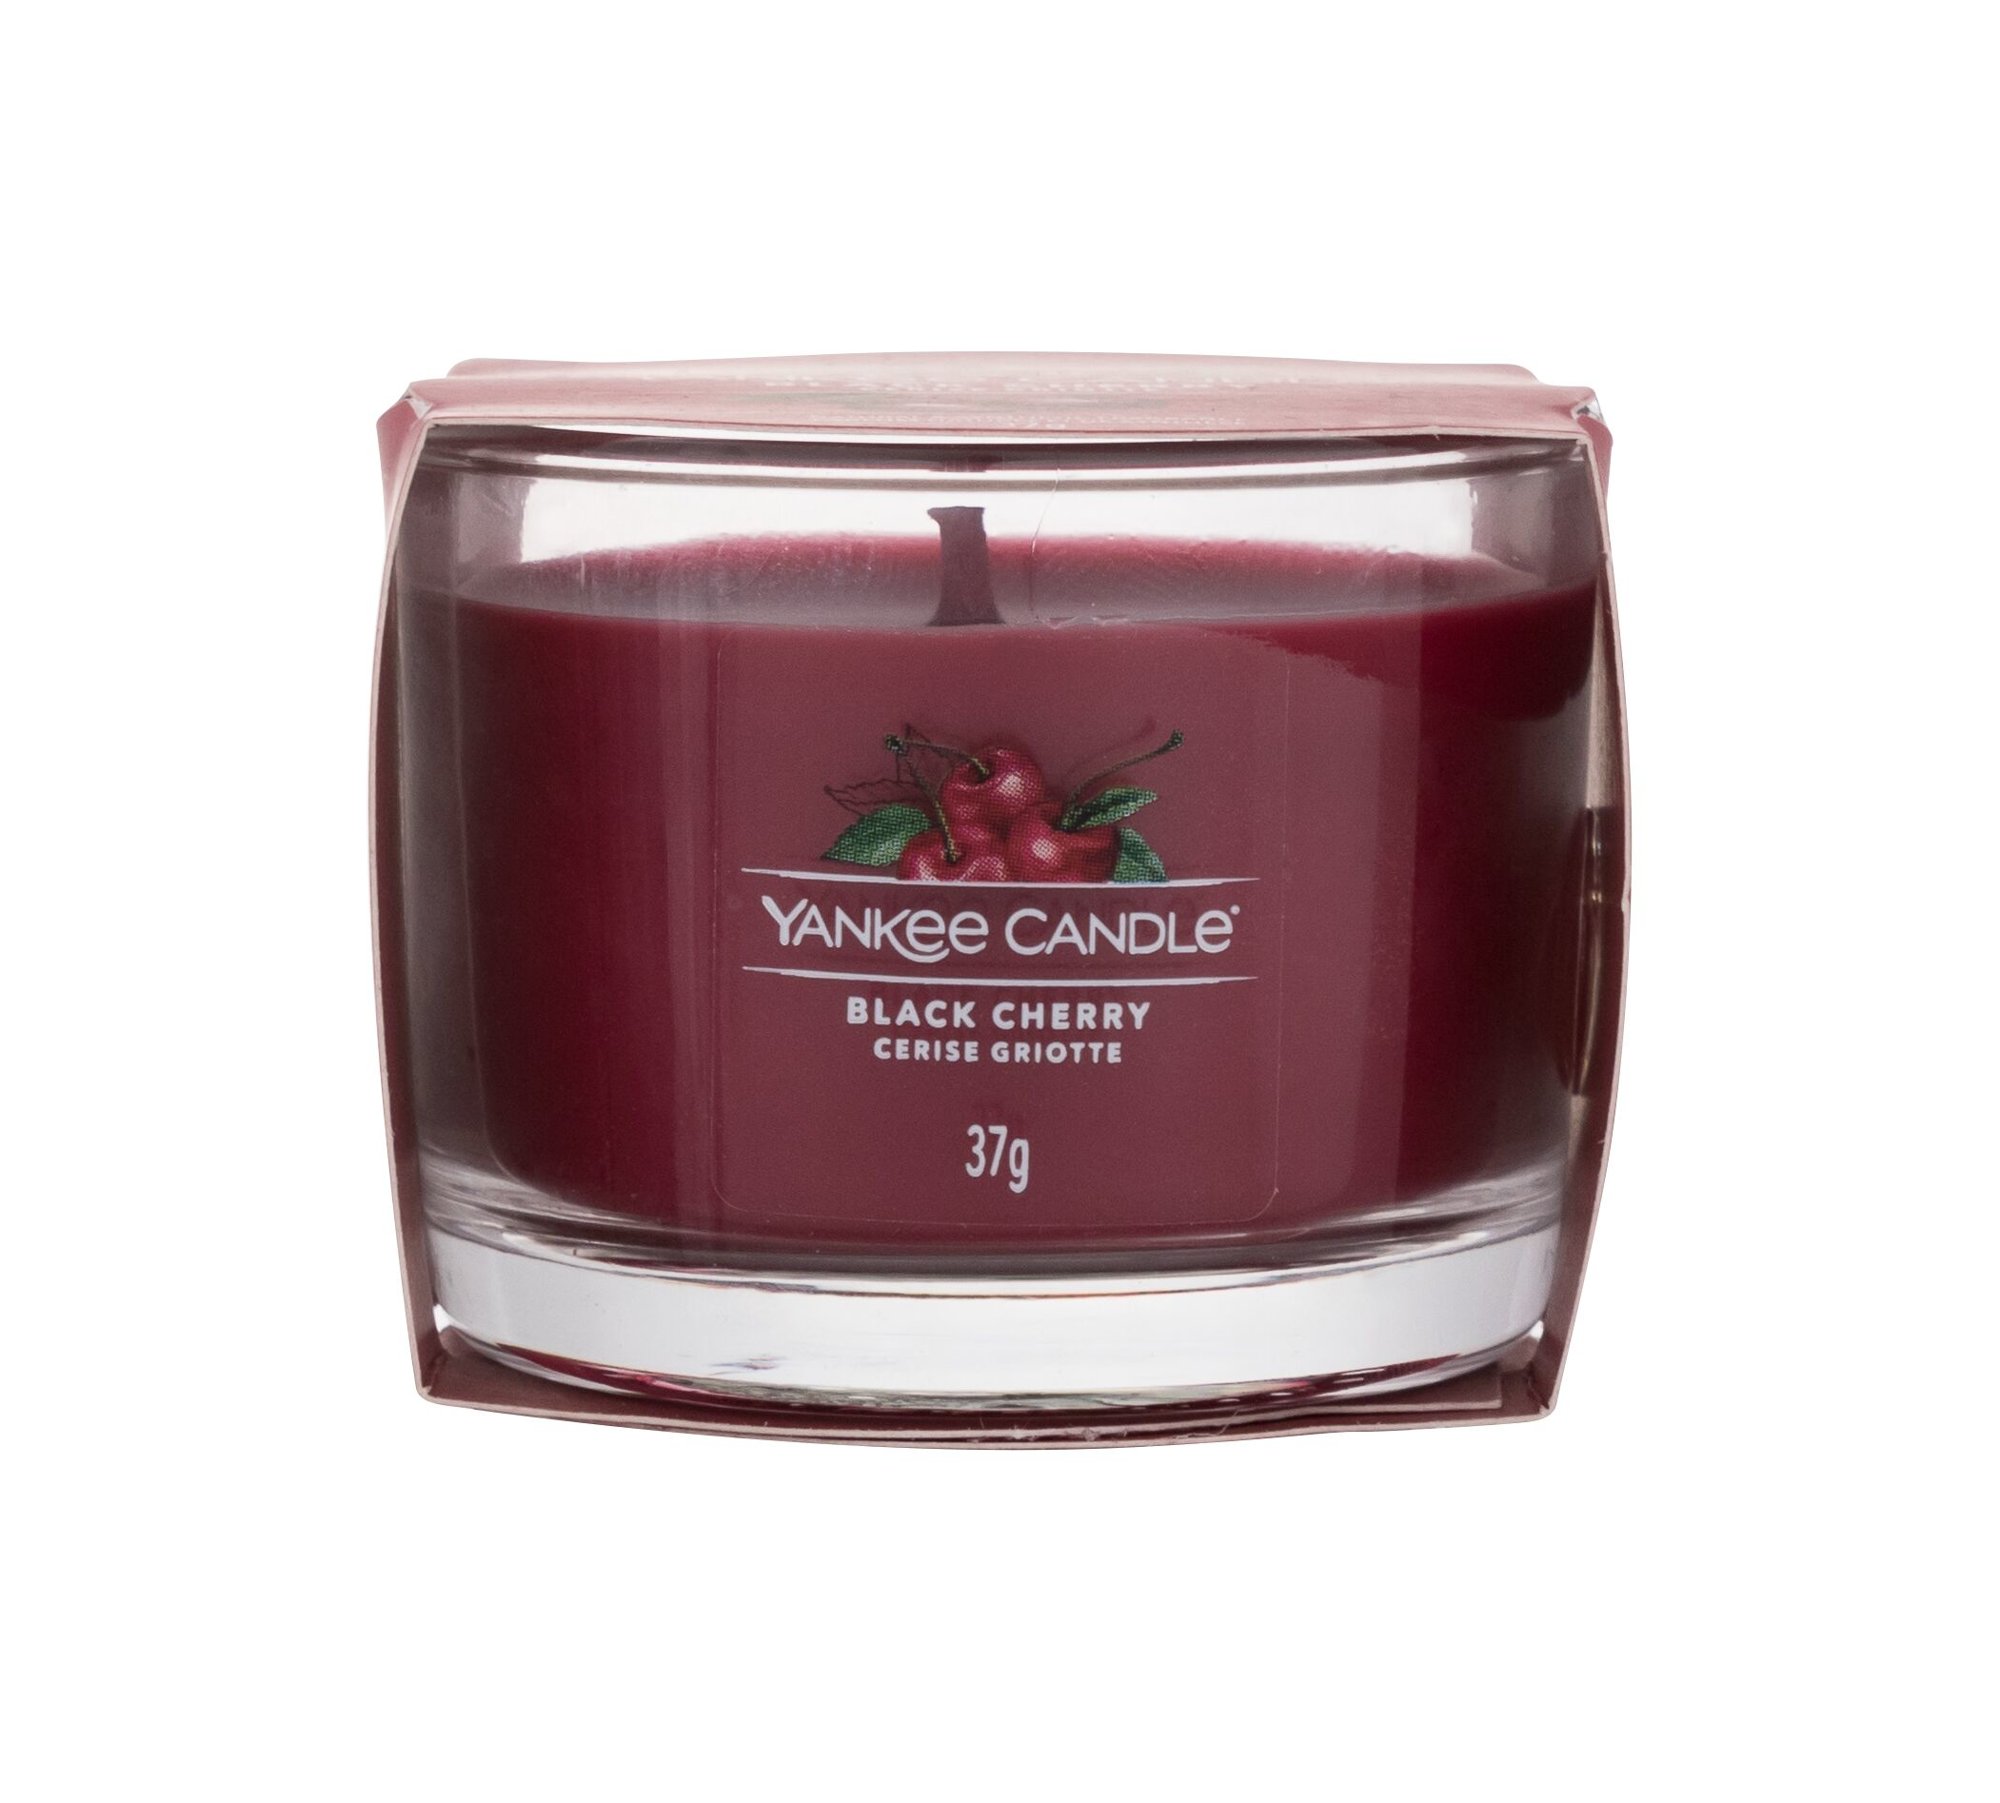 Yankee Candle Black Cherry 37g Kvepalai Unisex Scented Candle